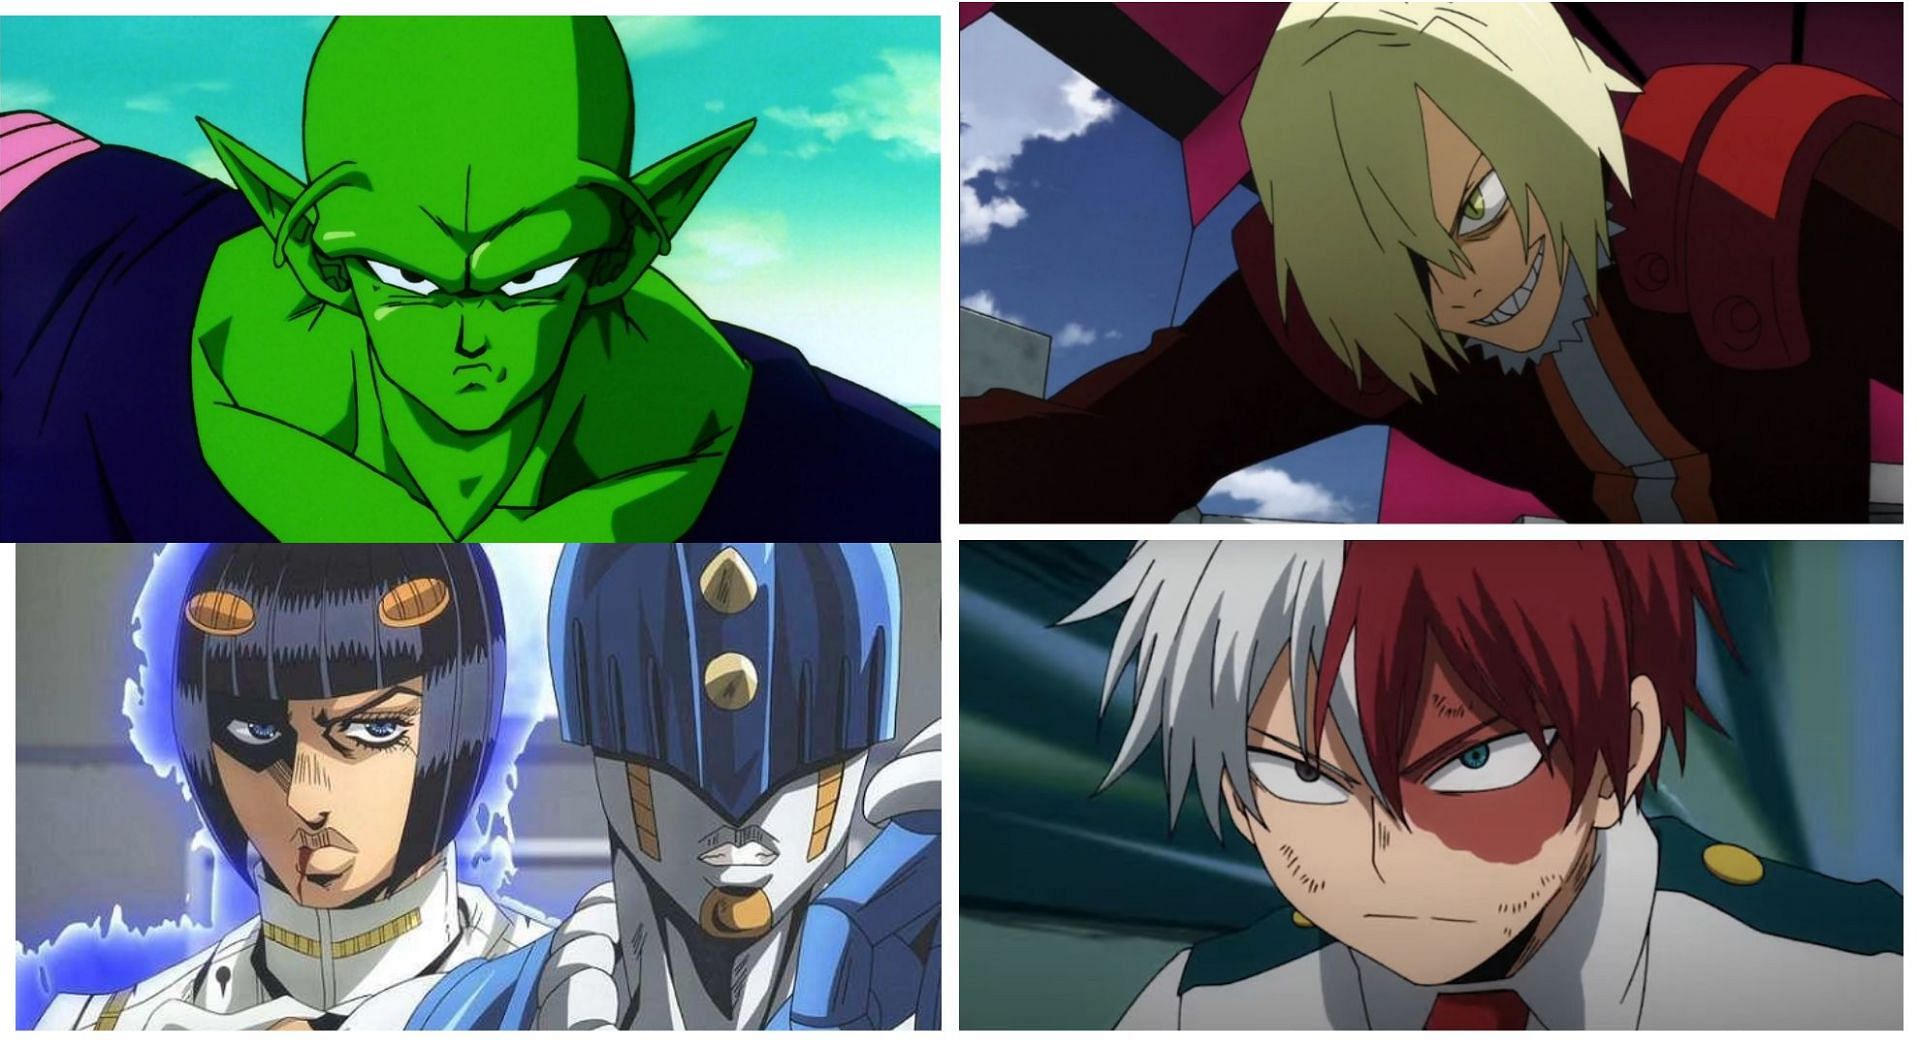 12 Anime That Make You Root For The Villain